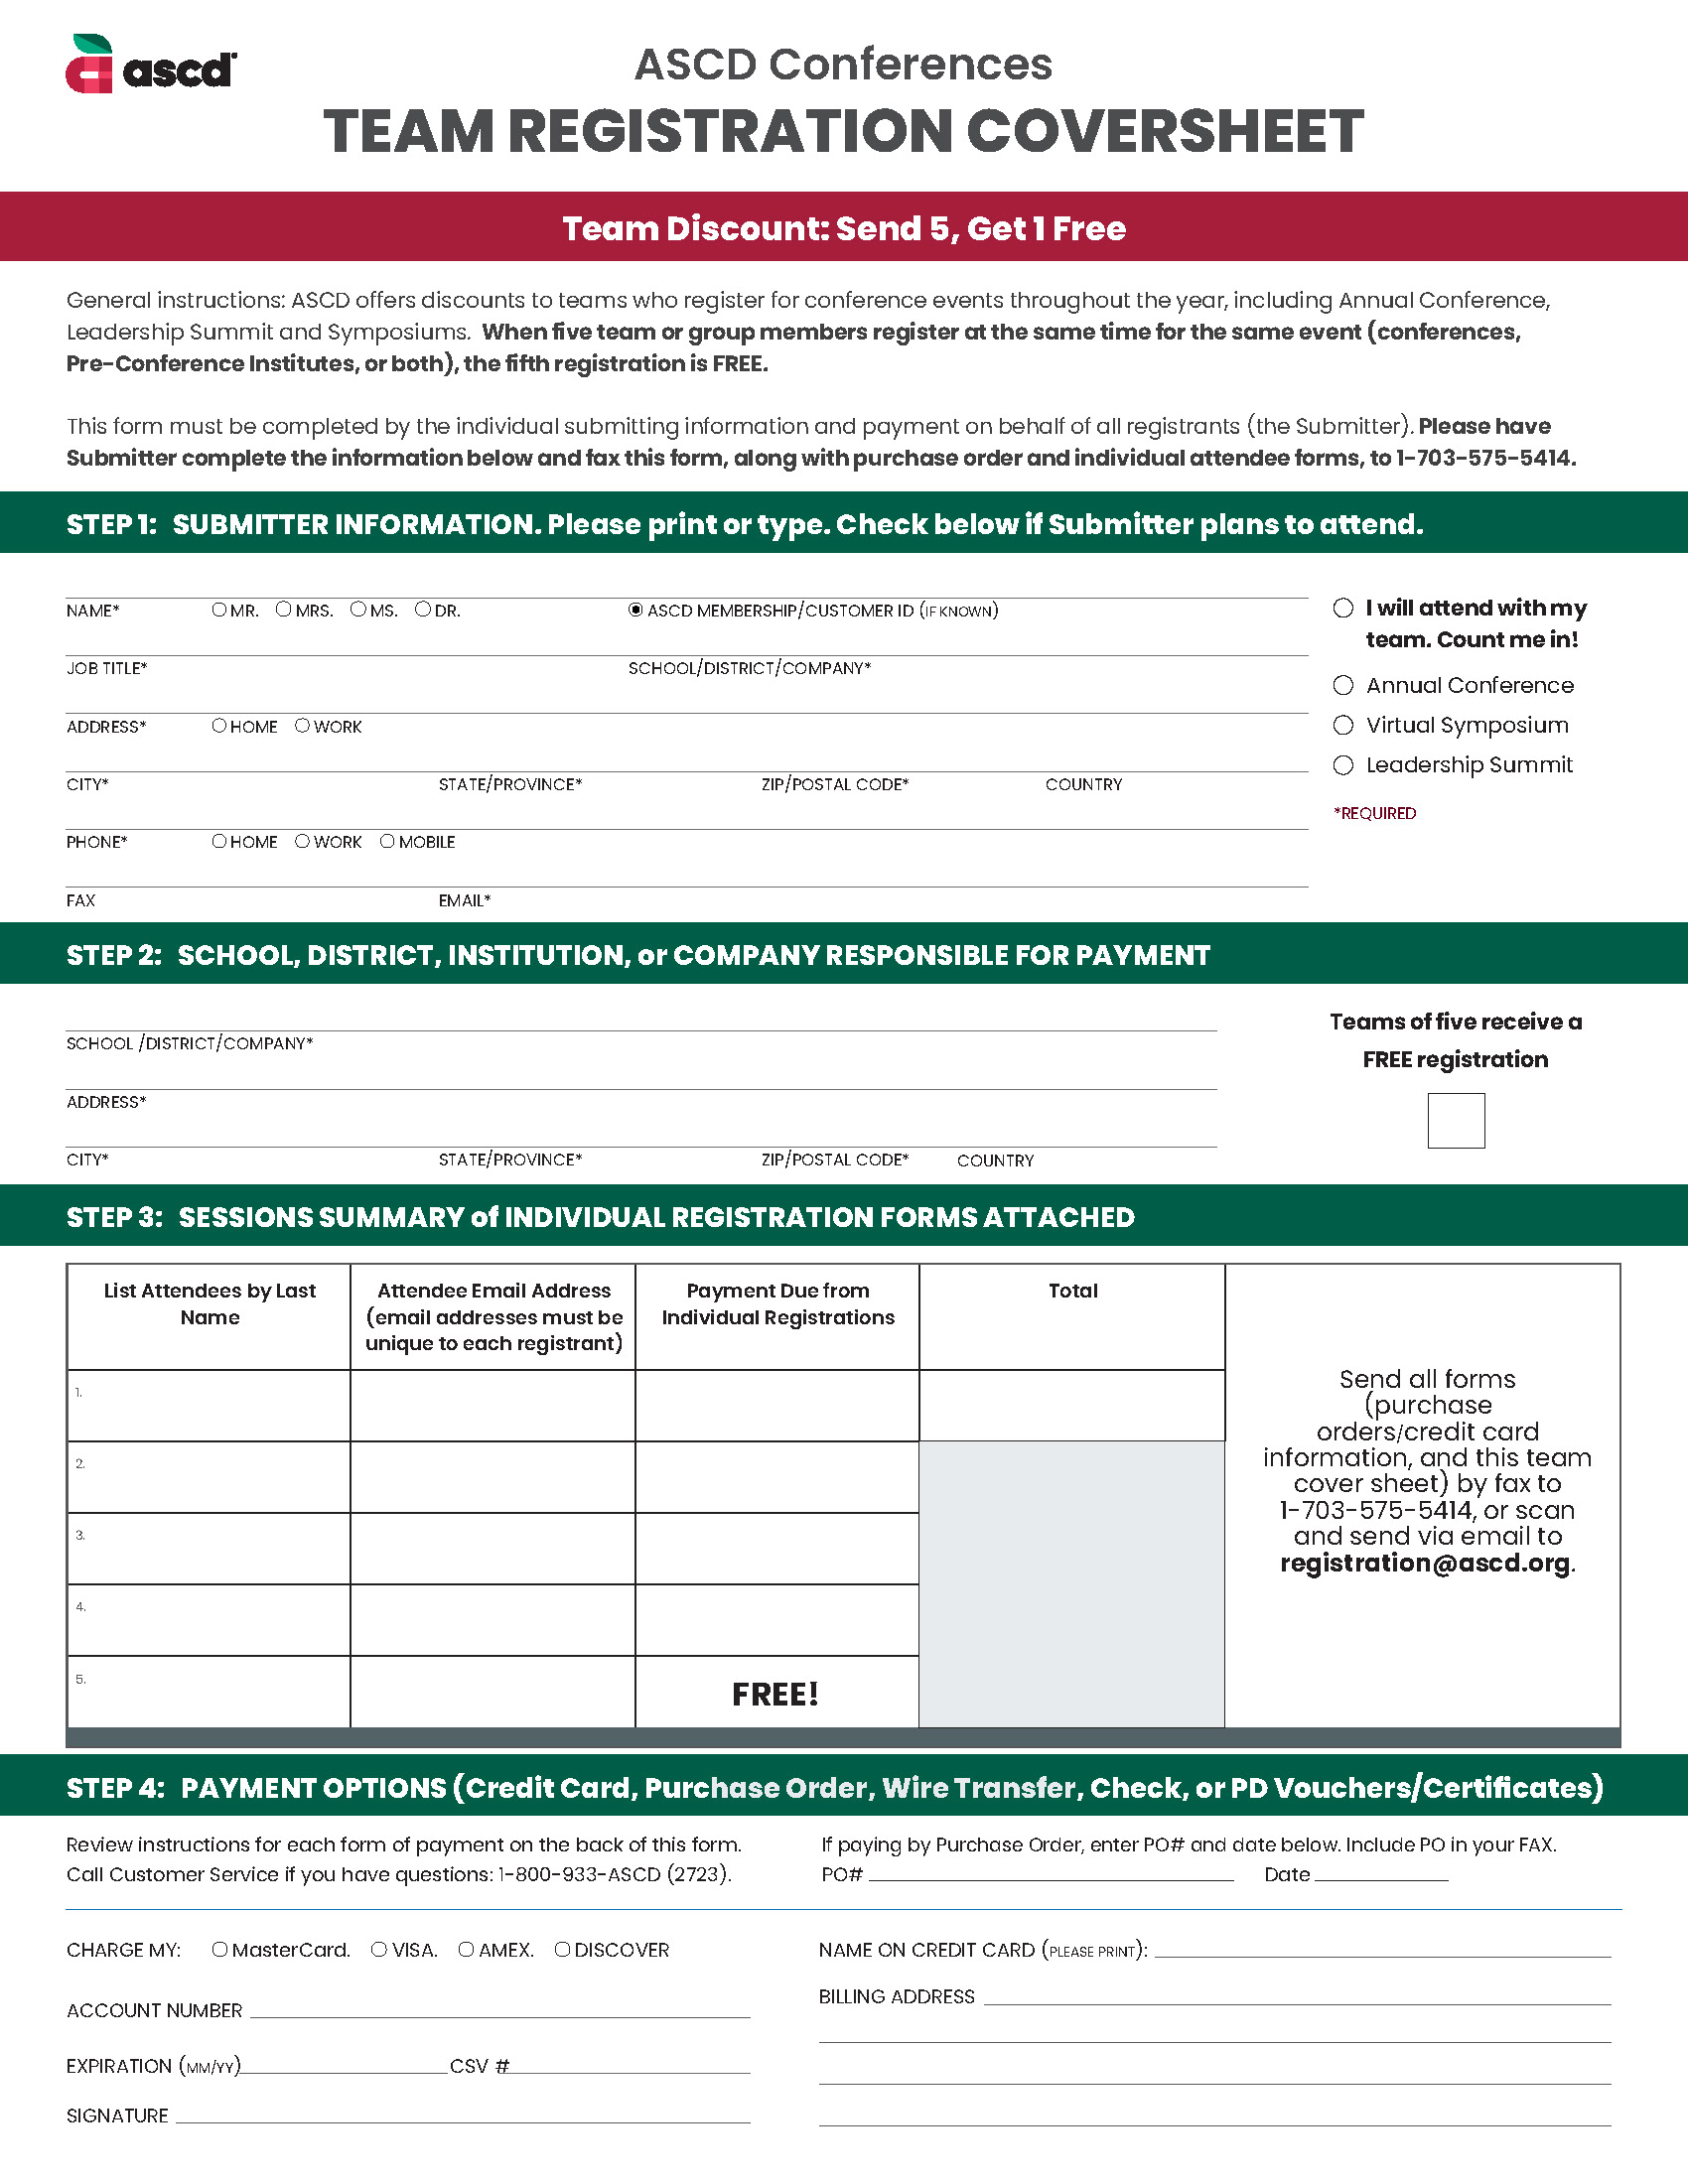 Conferences Team Registration Coversheet_fillable_Page_1